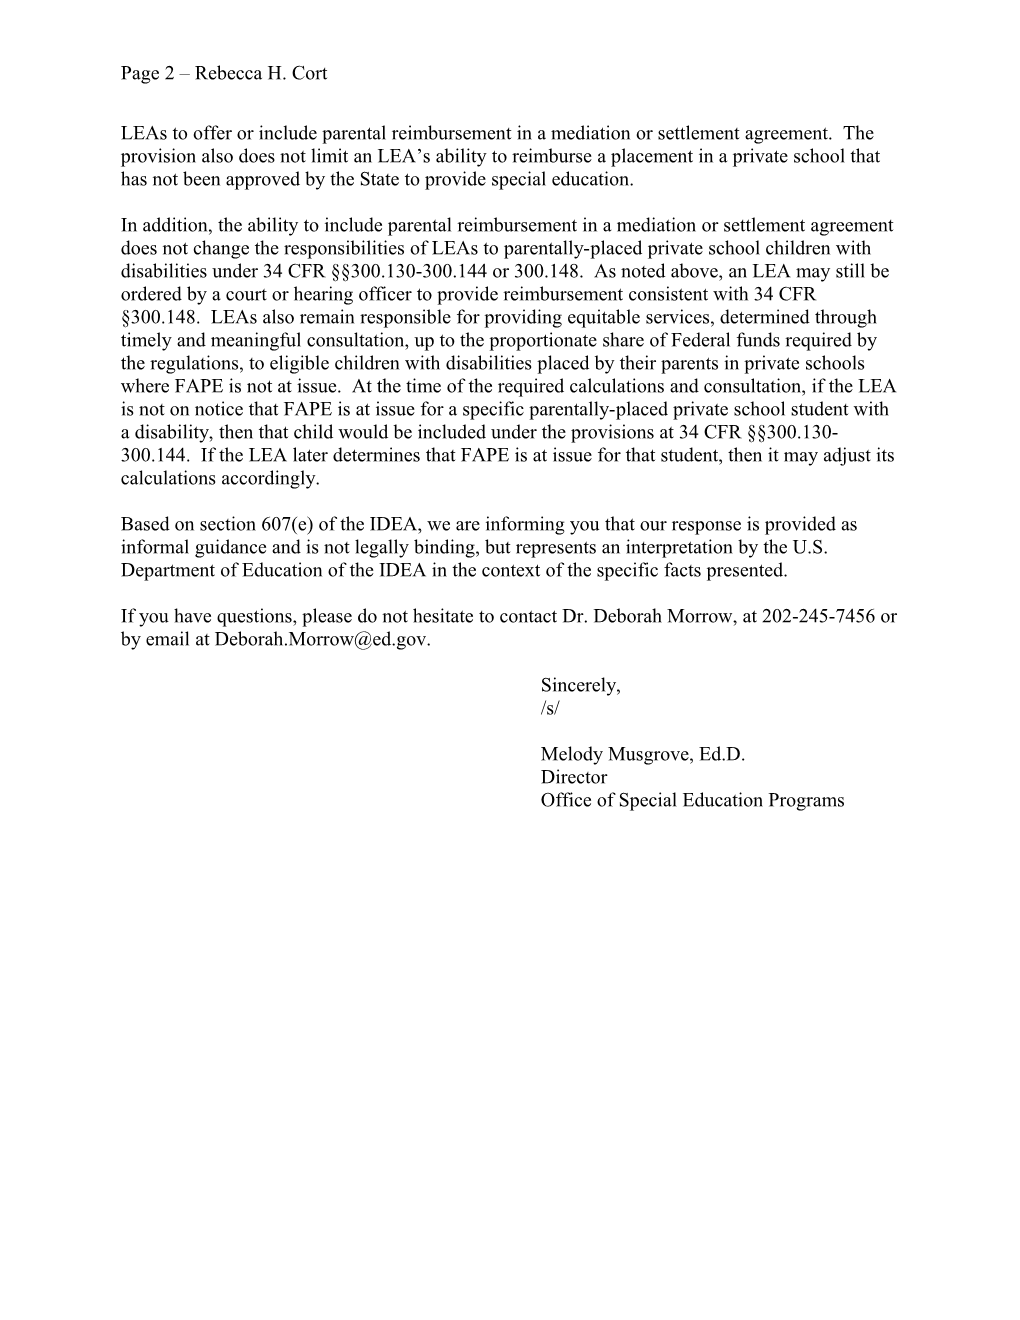 Cort Letter Dated 01/05/11 Re: Tuition (Ms Word)